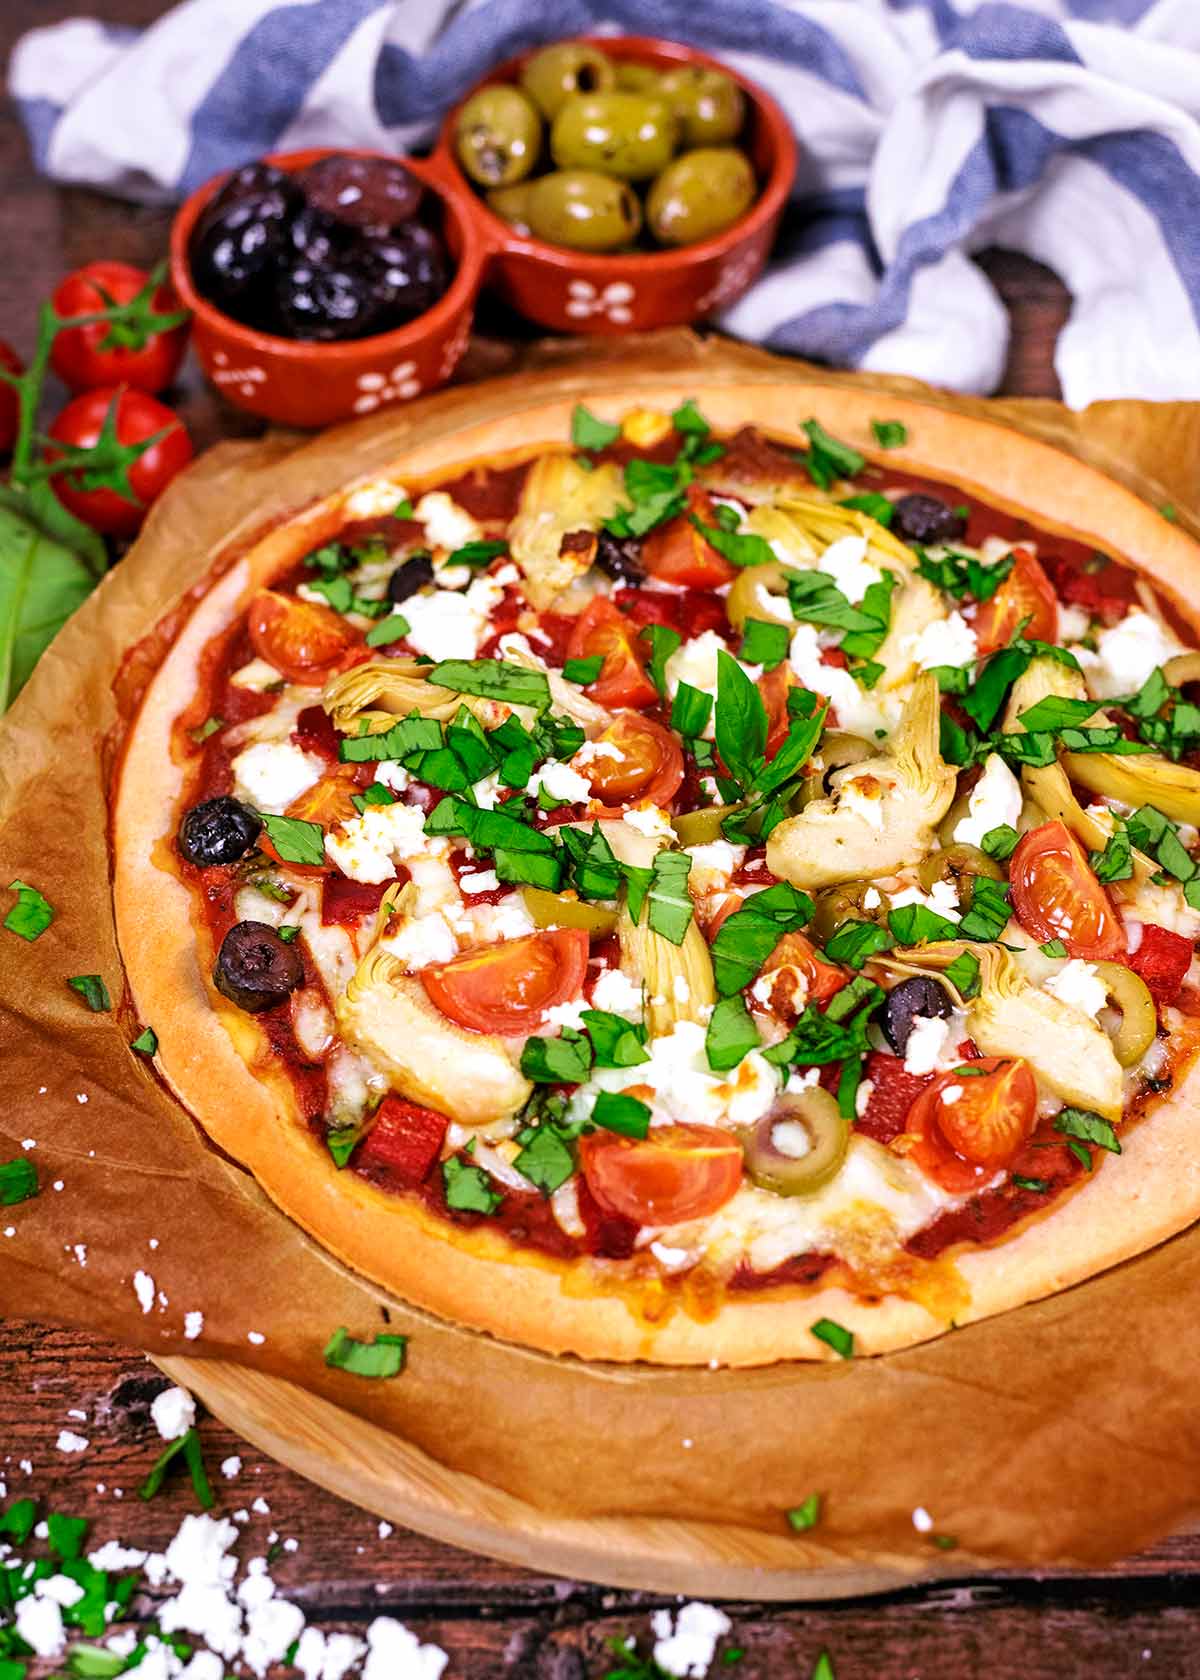 Pizza topped with chopped basil in front of a striped towel and a bowl of olives.